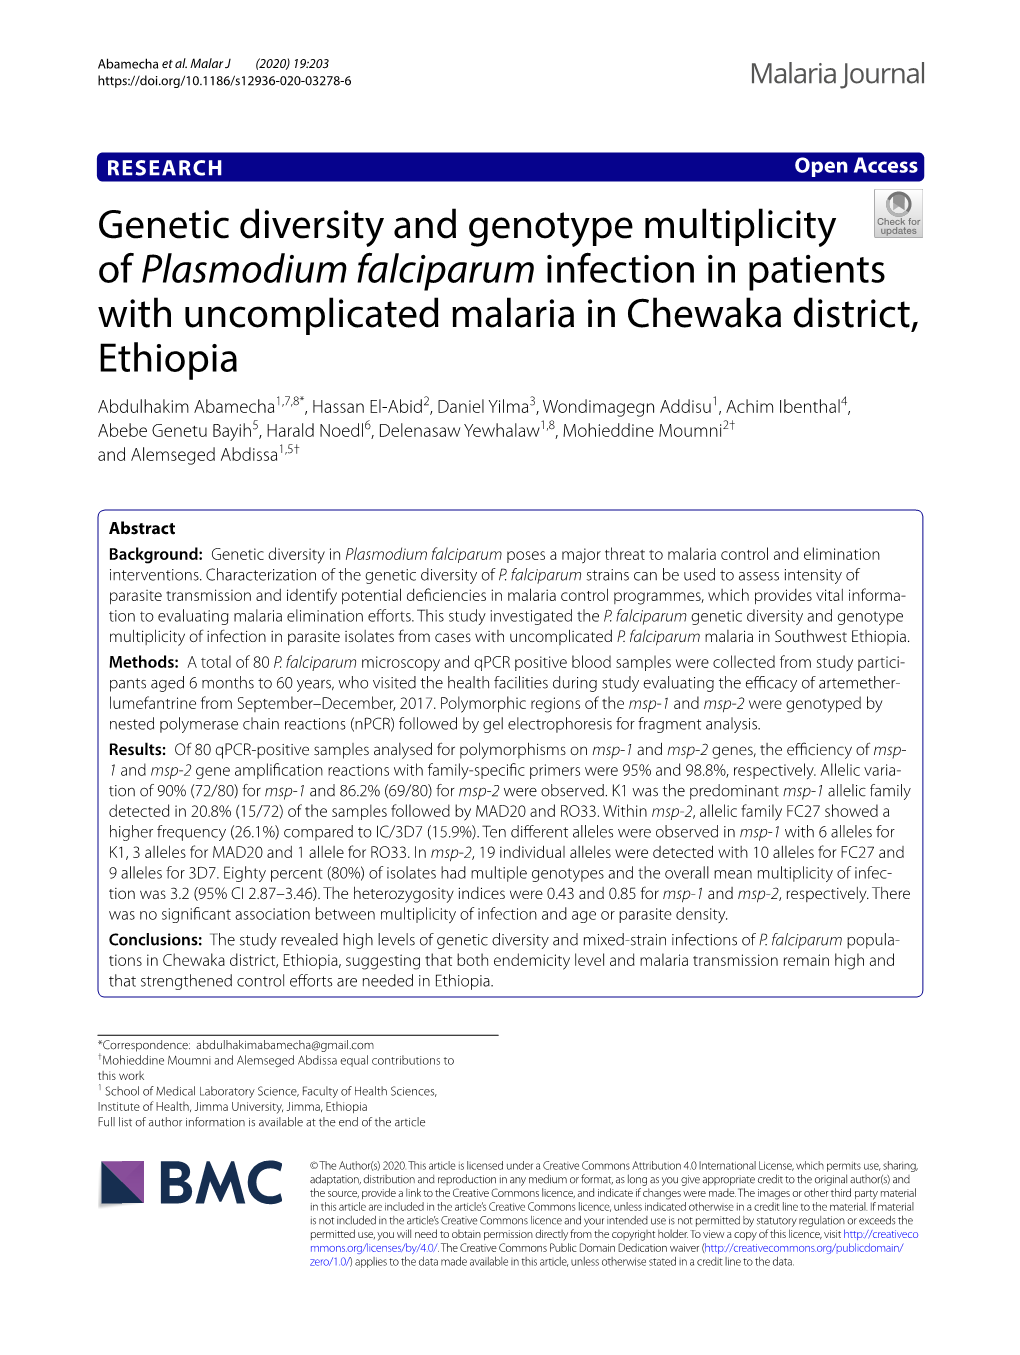 Genetic Diversity and Genotype Multiplicity of Plasmodium Falciparum Infection in Patients with Uncomplicated Malaria in Chewaka